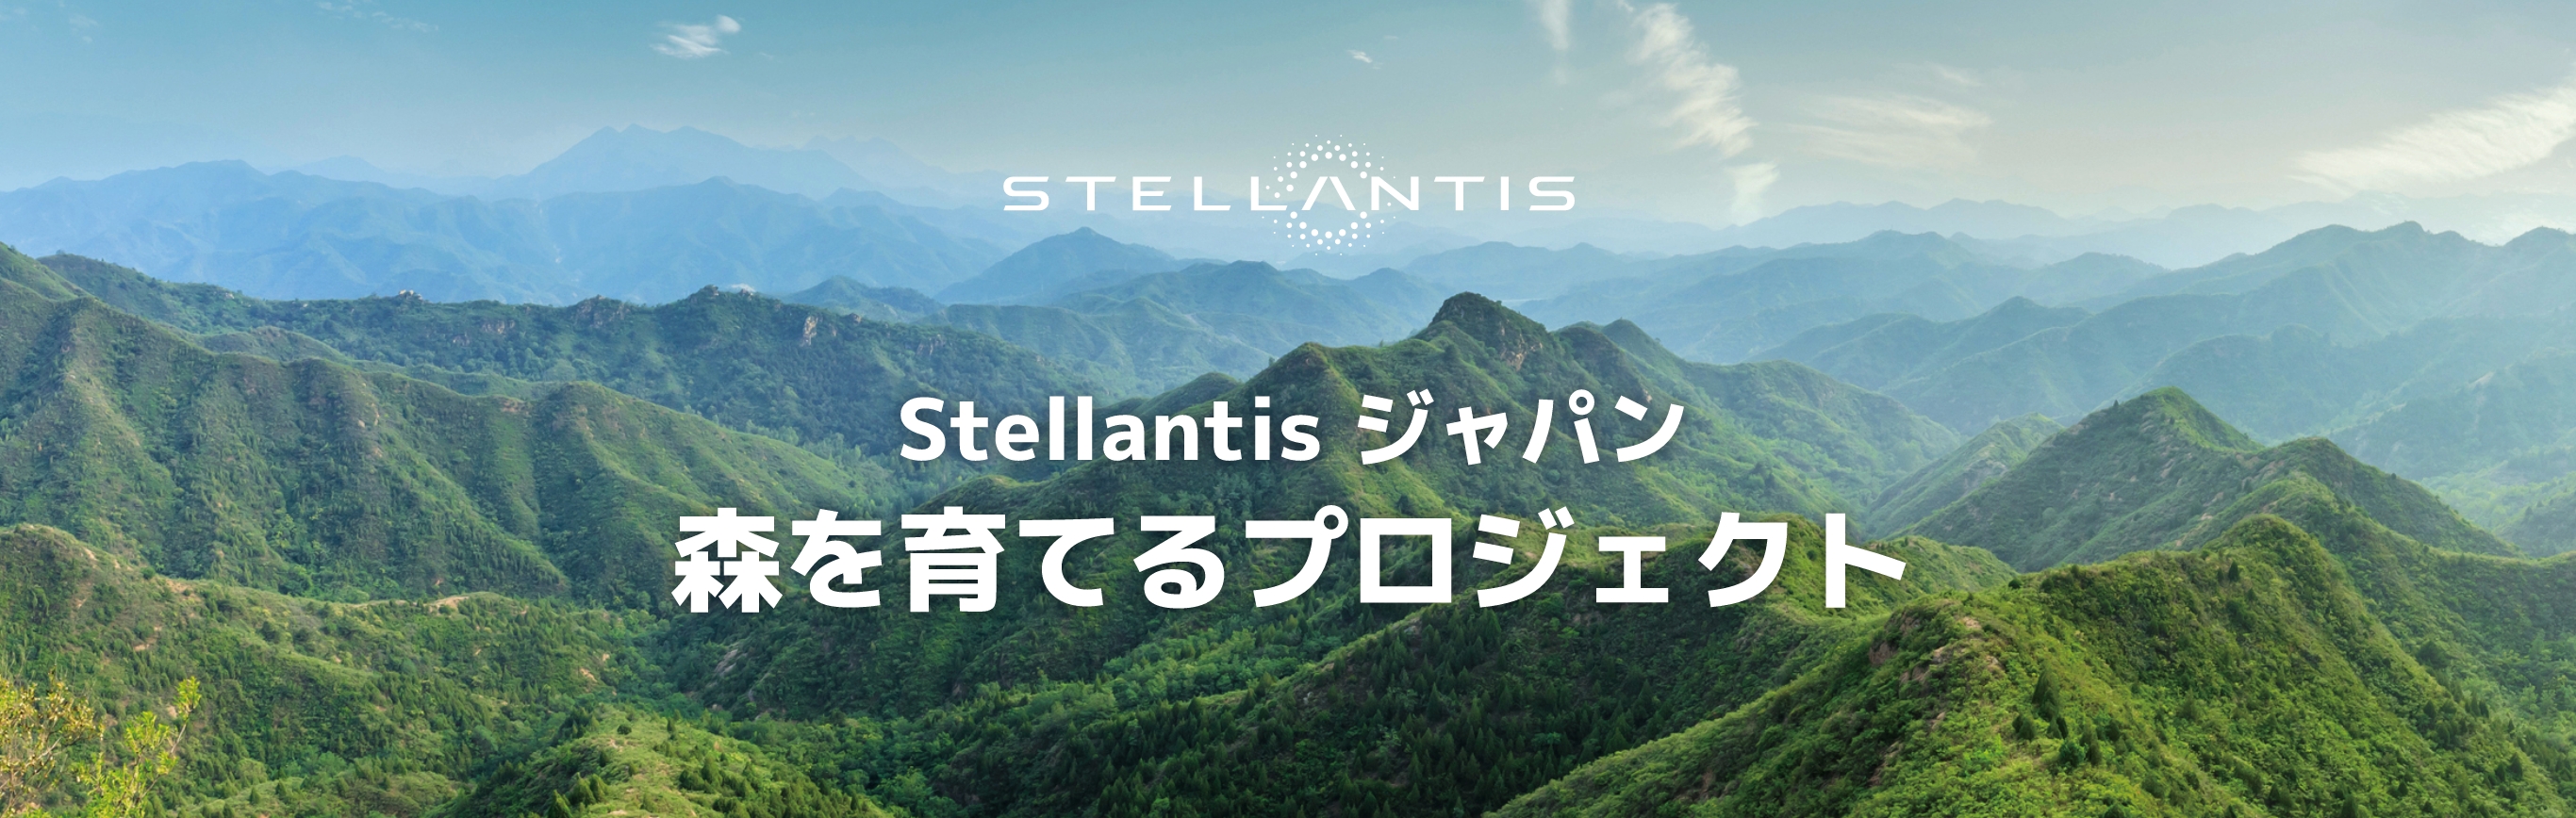 Drive Sustainable Mobility.Stellantis 森を育てるプロジェクト